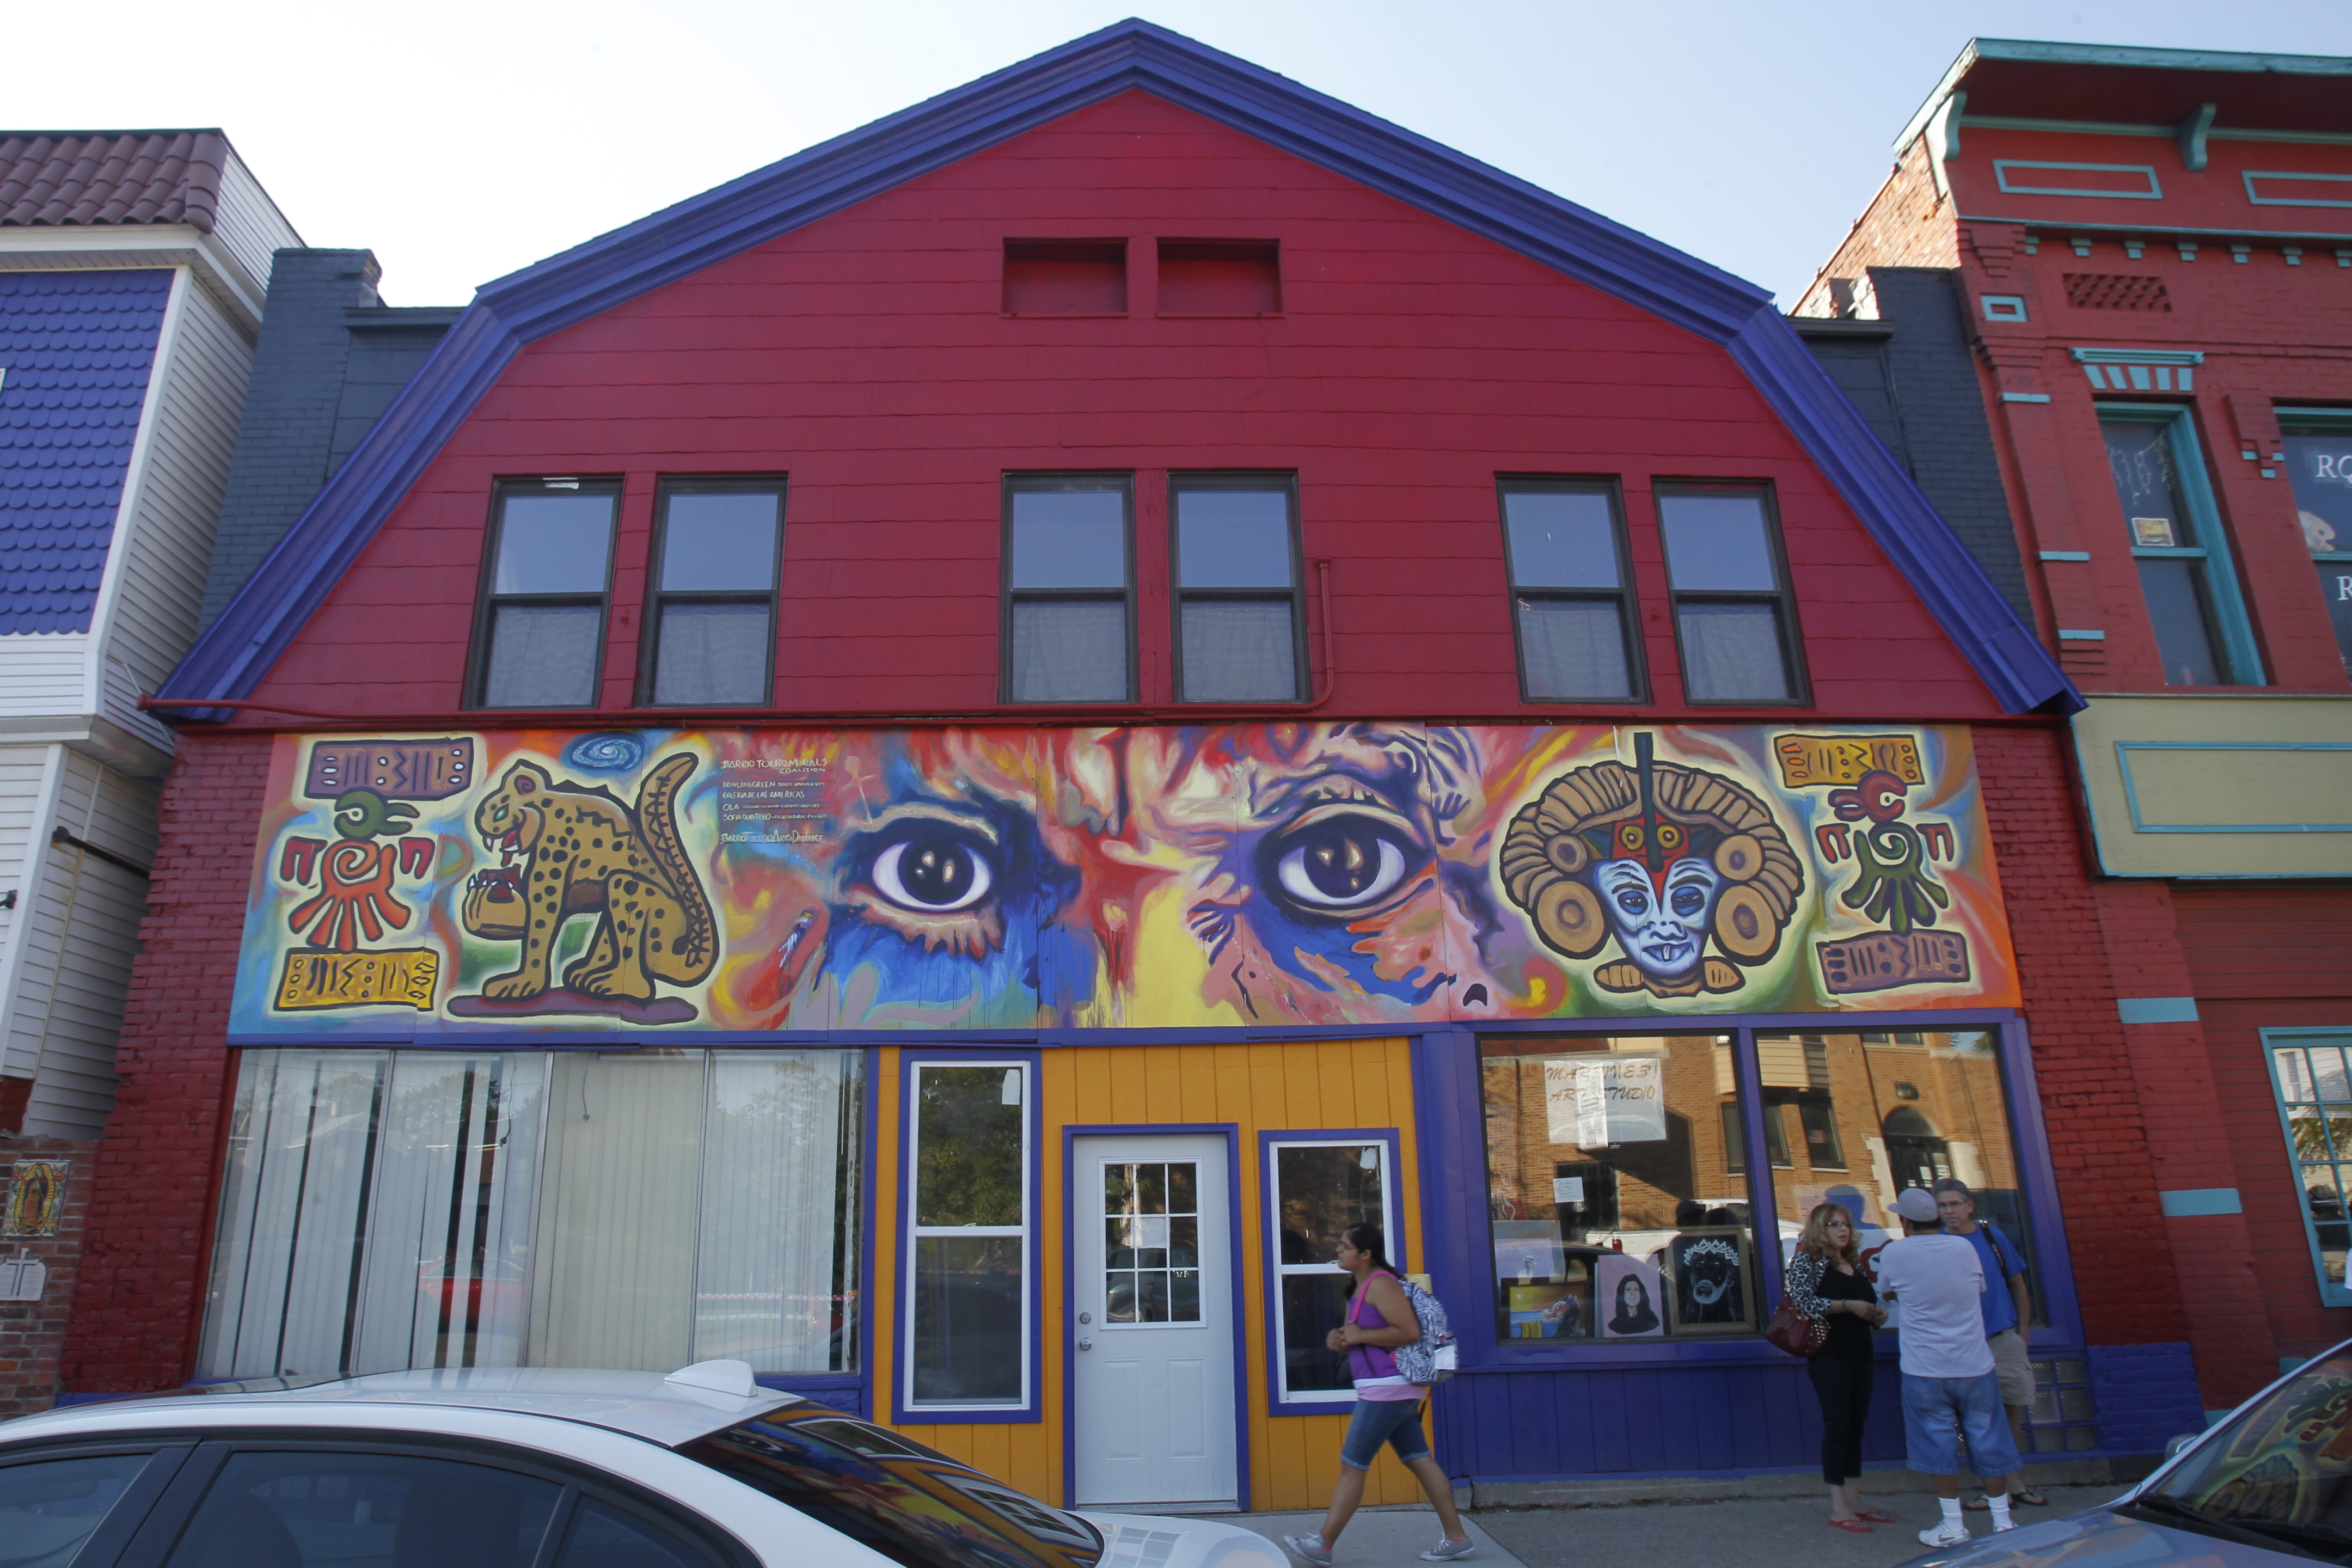 Dazzling murals light up Old South End - The Blade